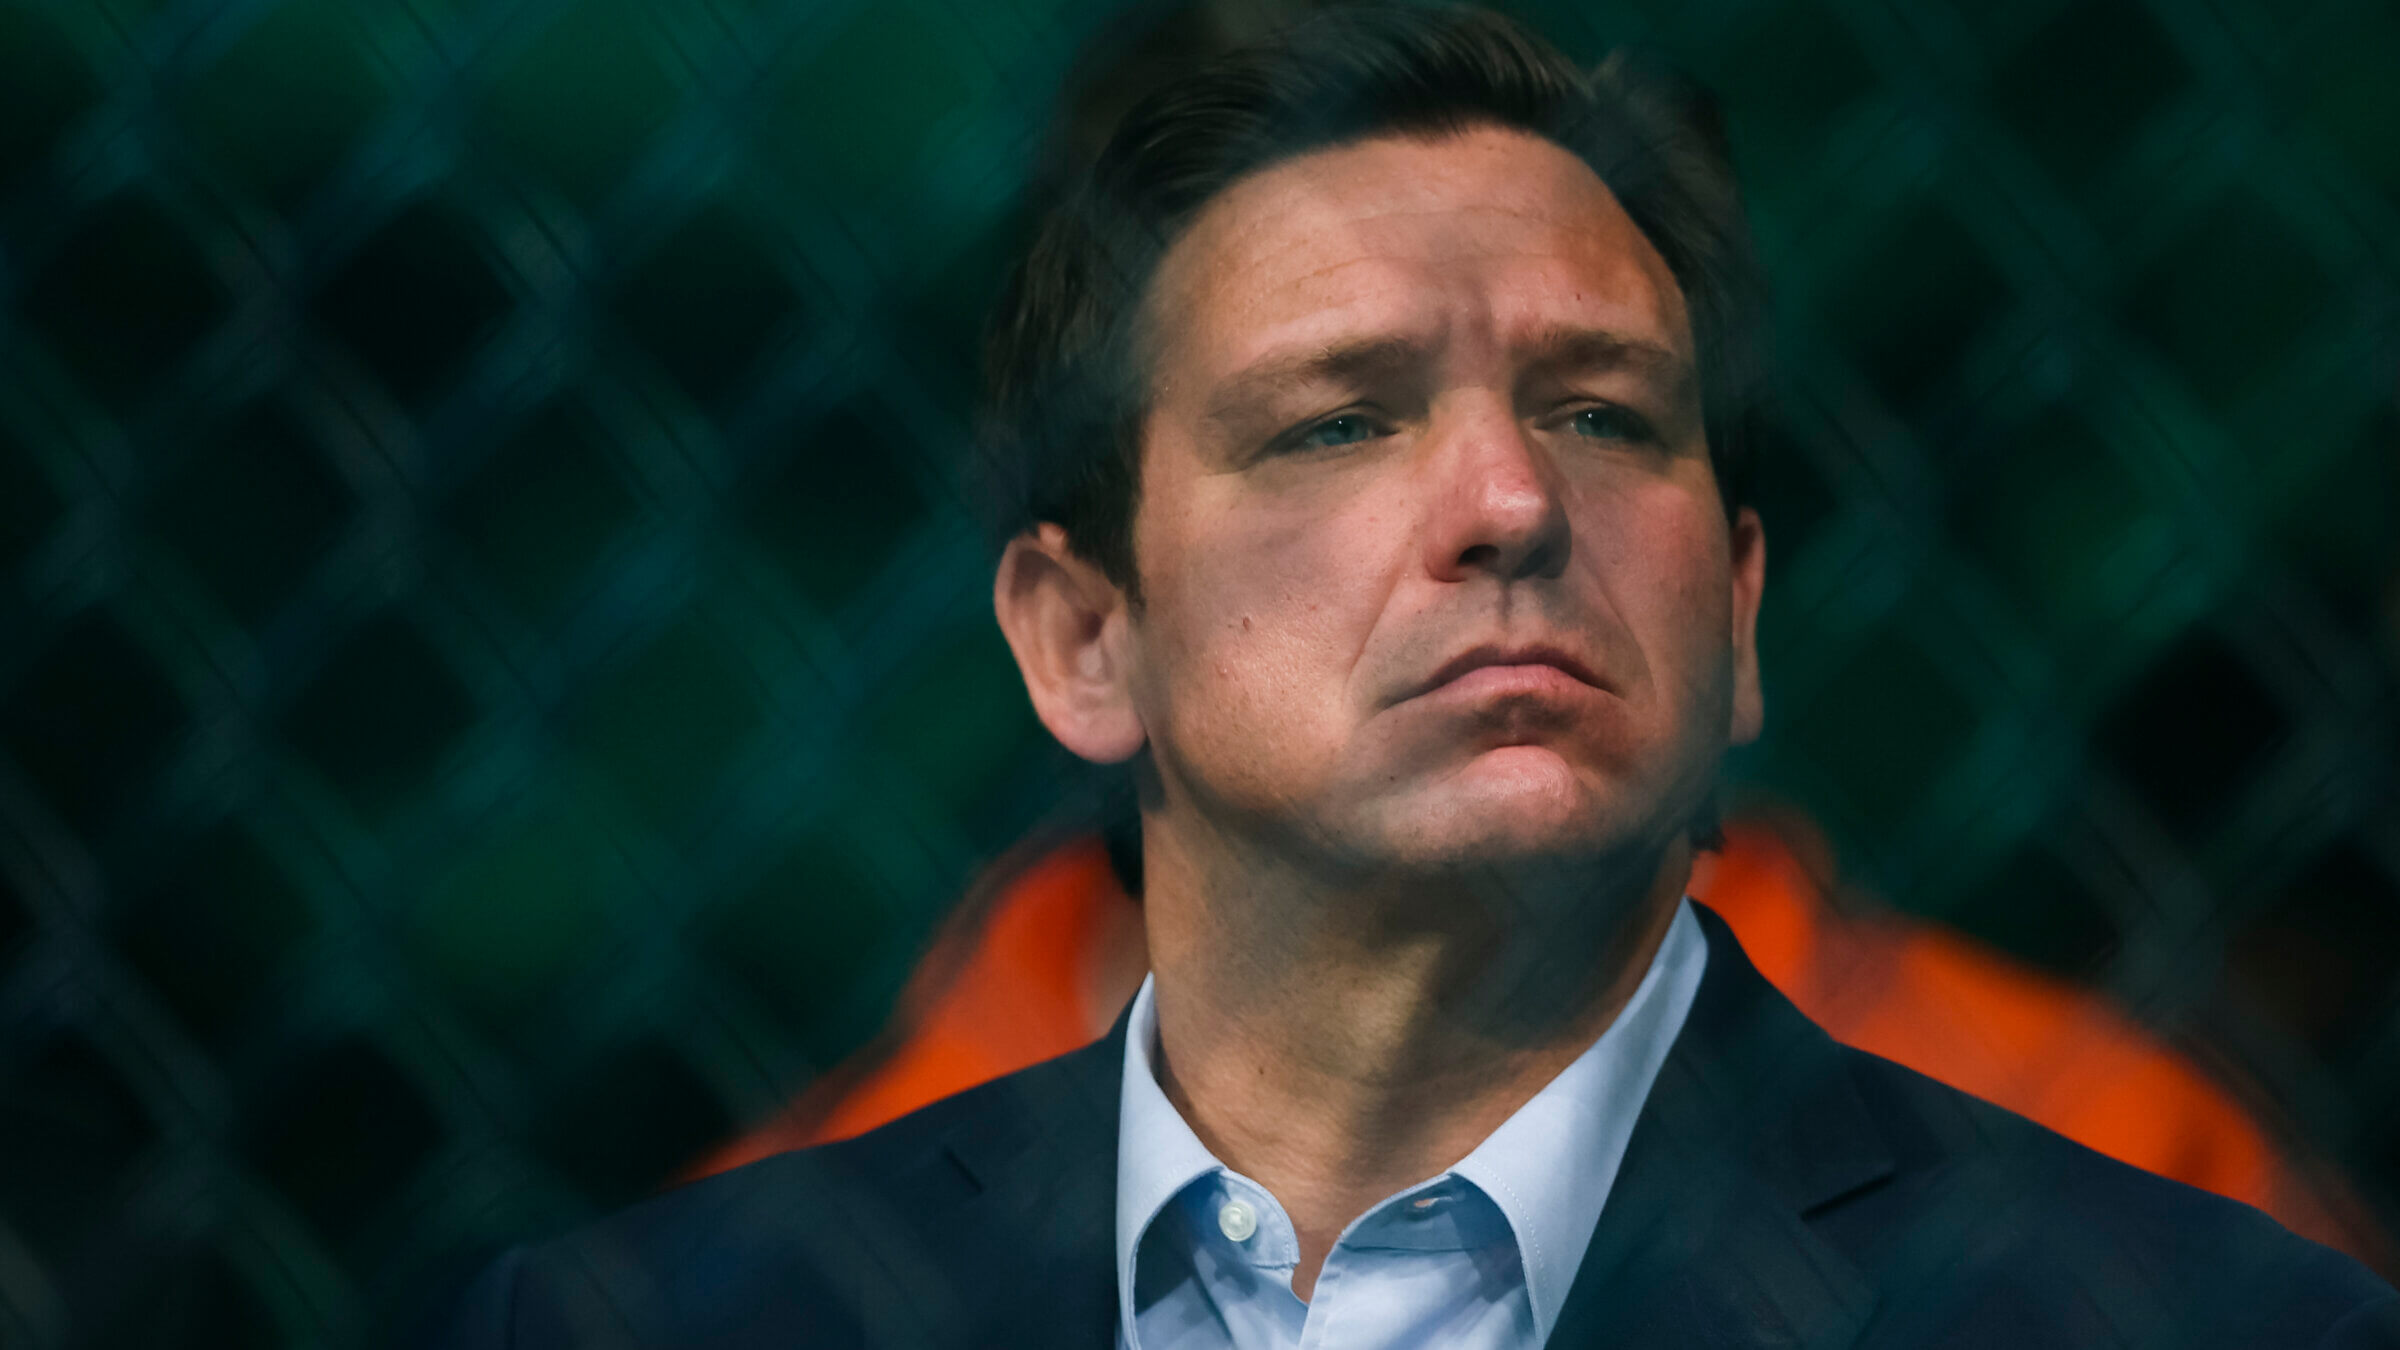 Ron Desantis is seen standing behind a fence